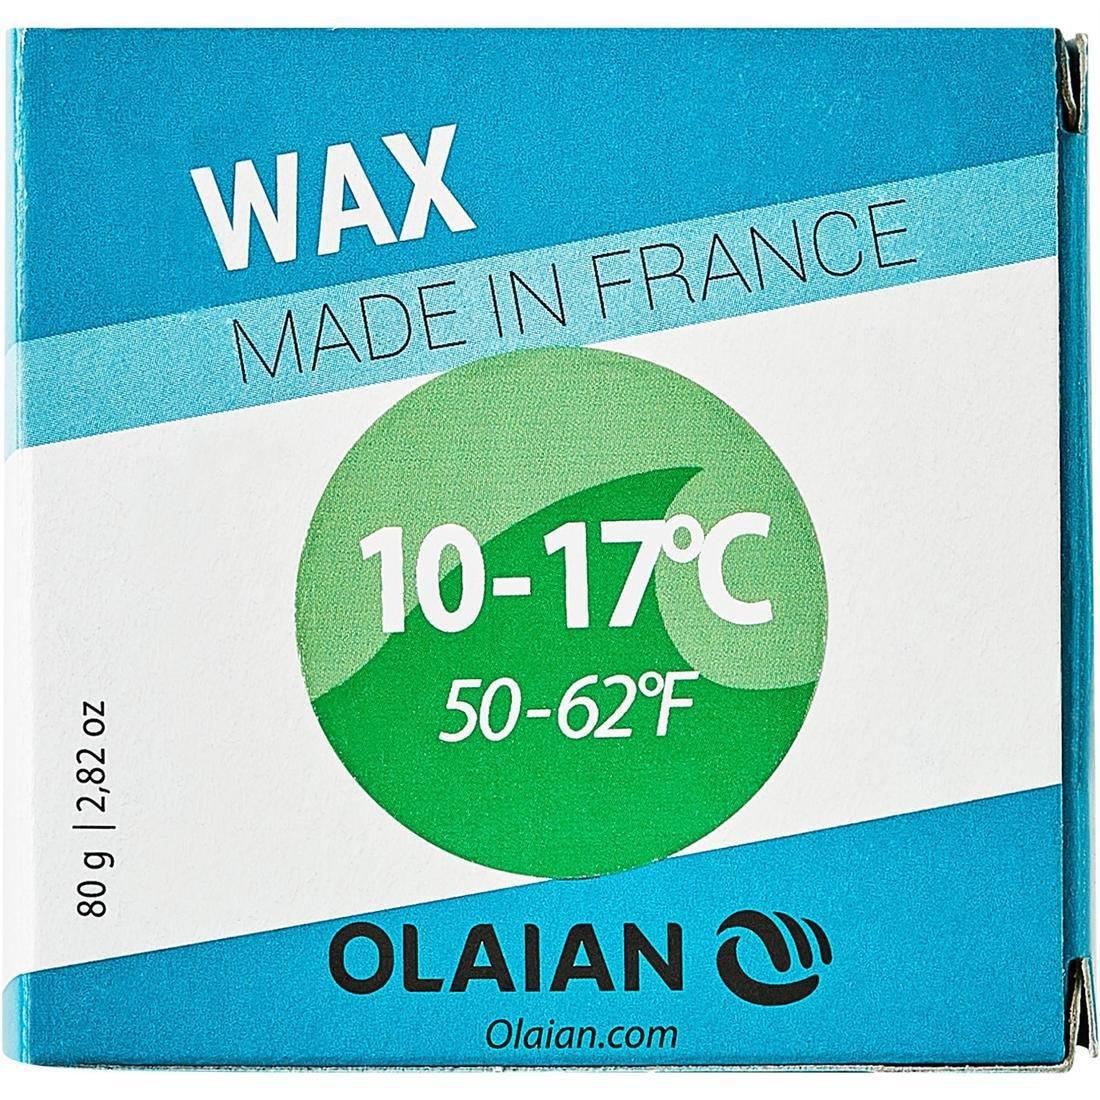 OLAIAN - Temperate Water Surf Wax, Beige